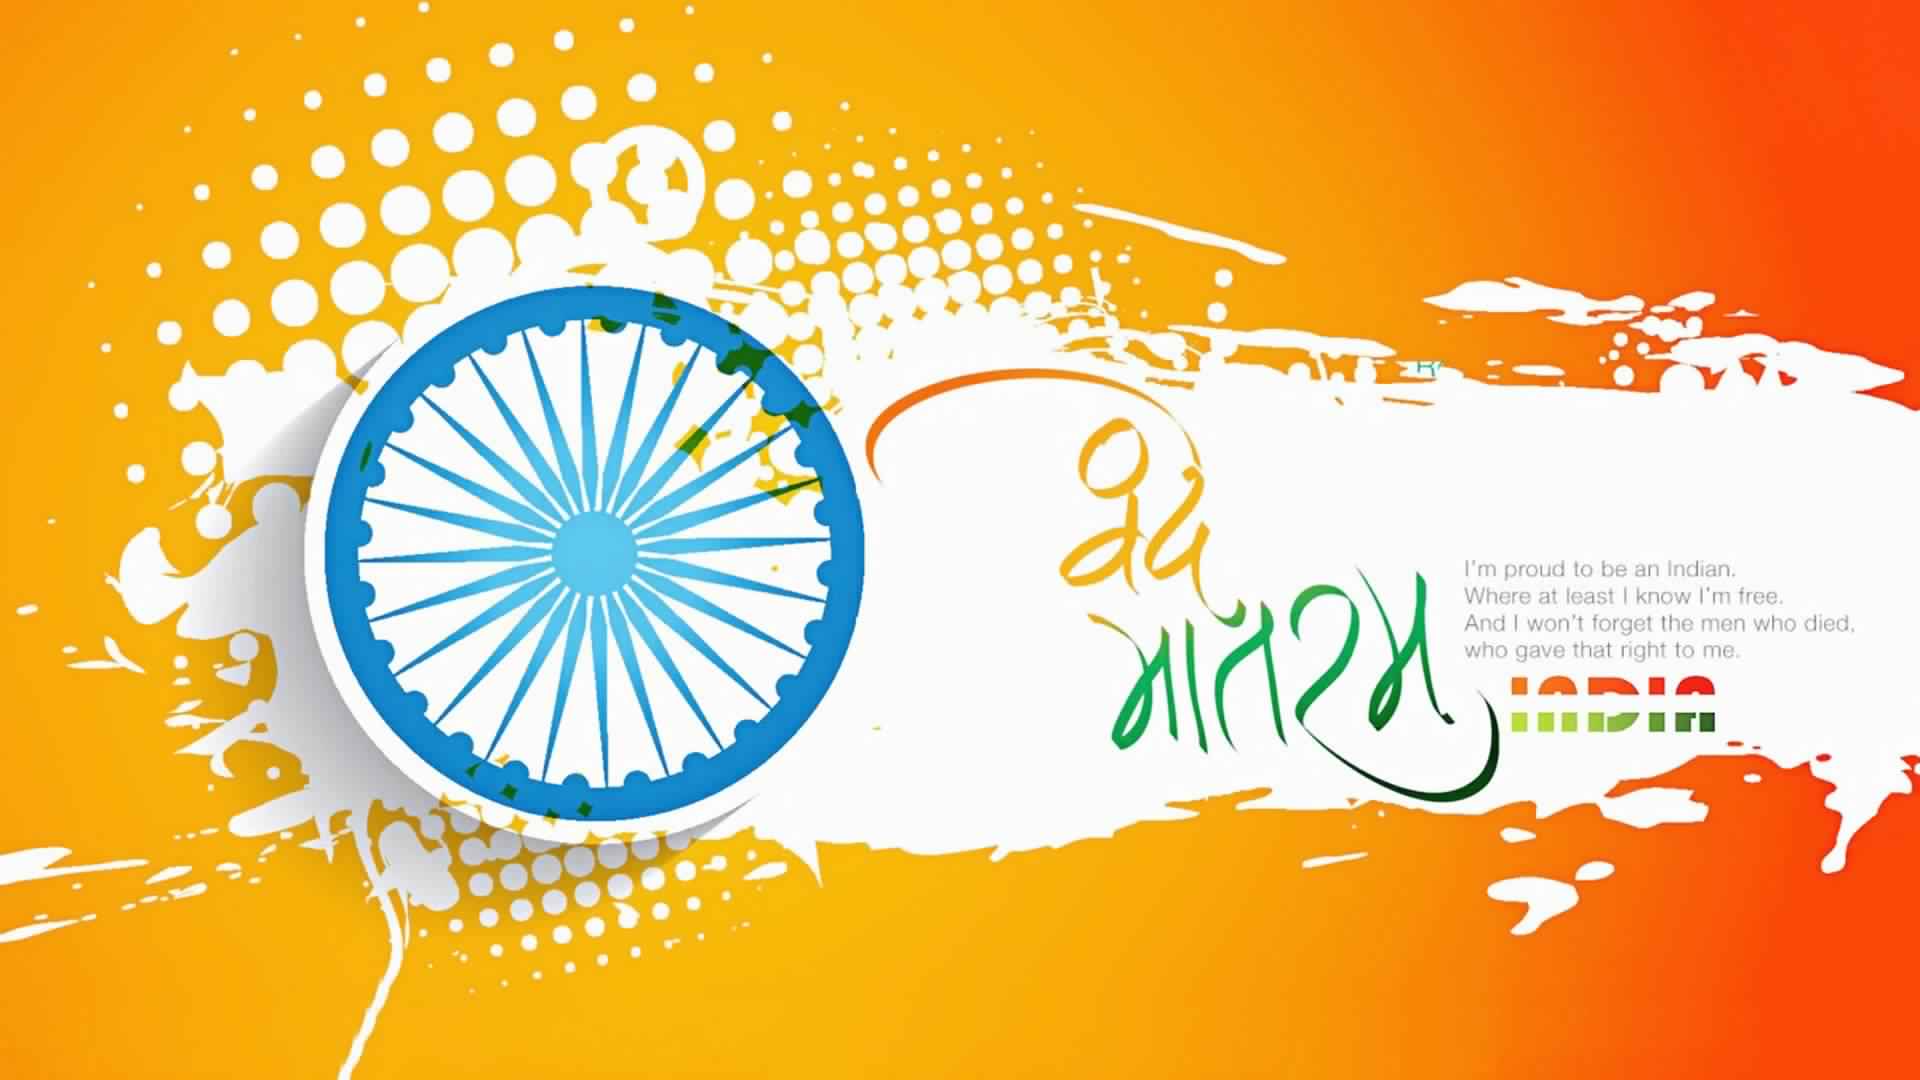 India republic day images for desktop background for pc